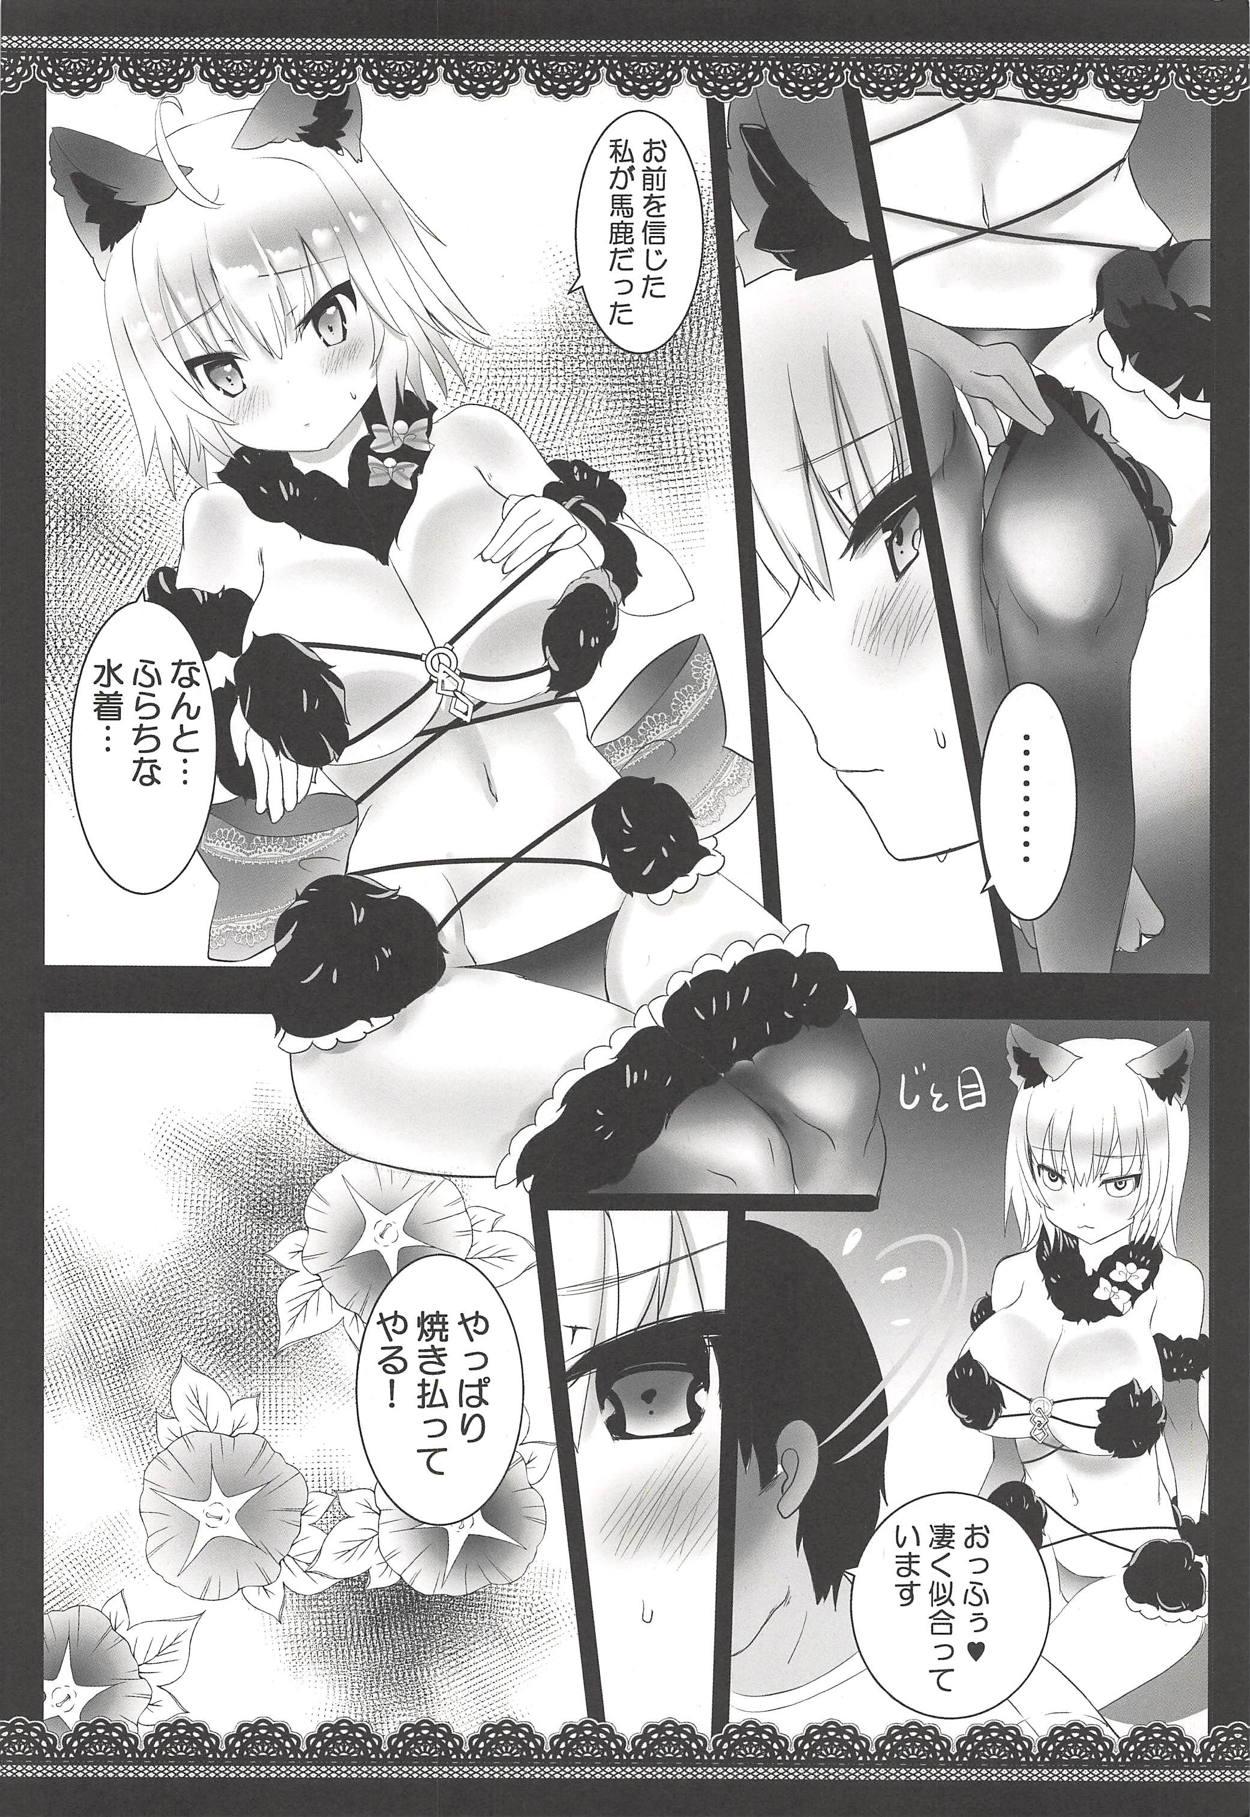 Thief Dangerous Jeanne-san to Love Chucchu - Fate grand order Gay Latino - Page 5